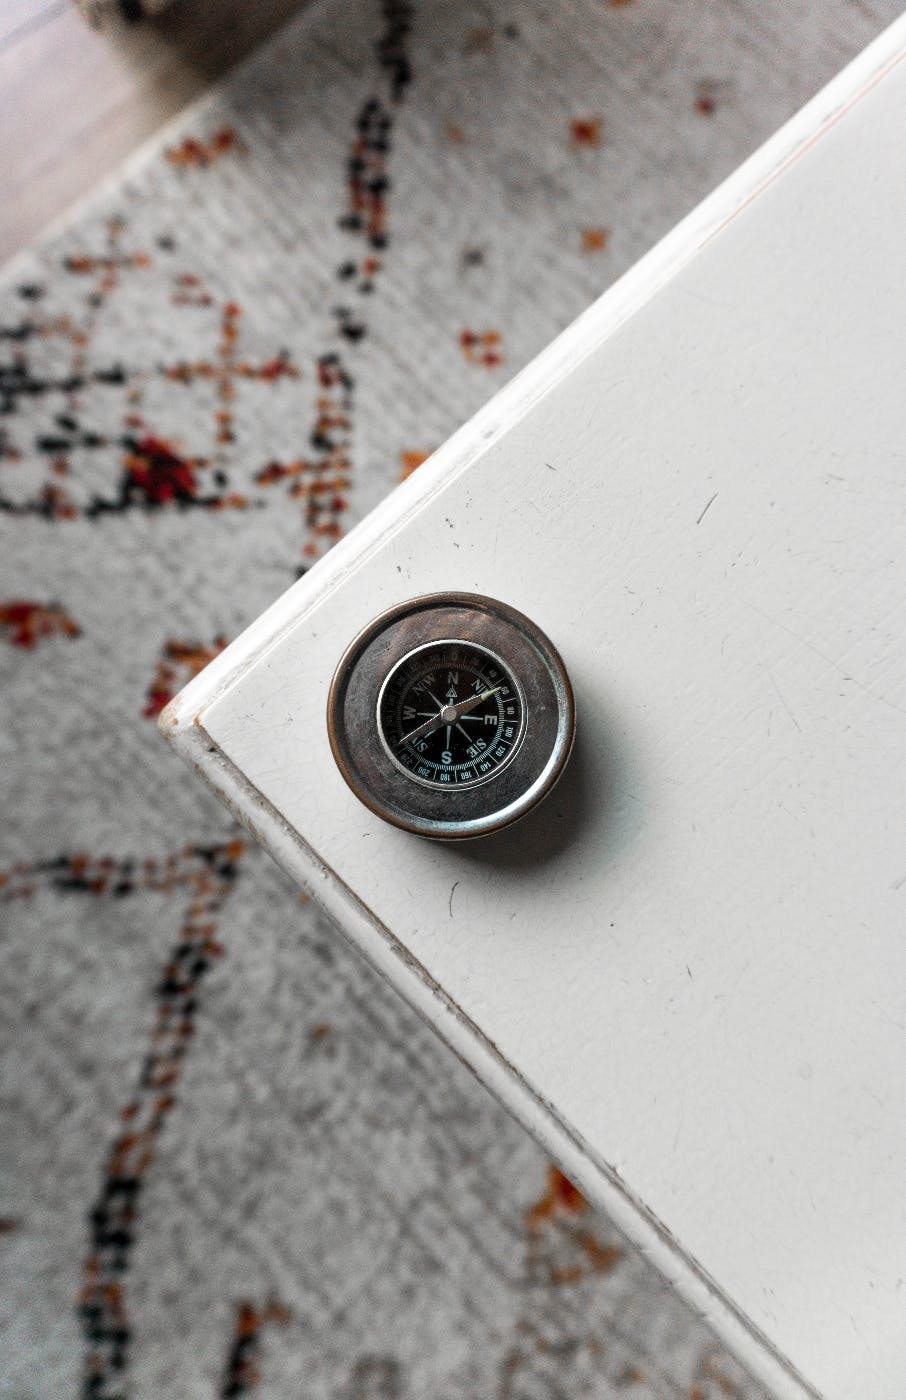 A tarnished silver compass on the edge of a white table